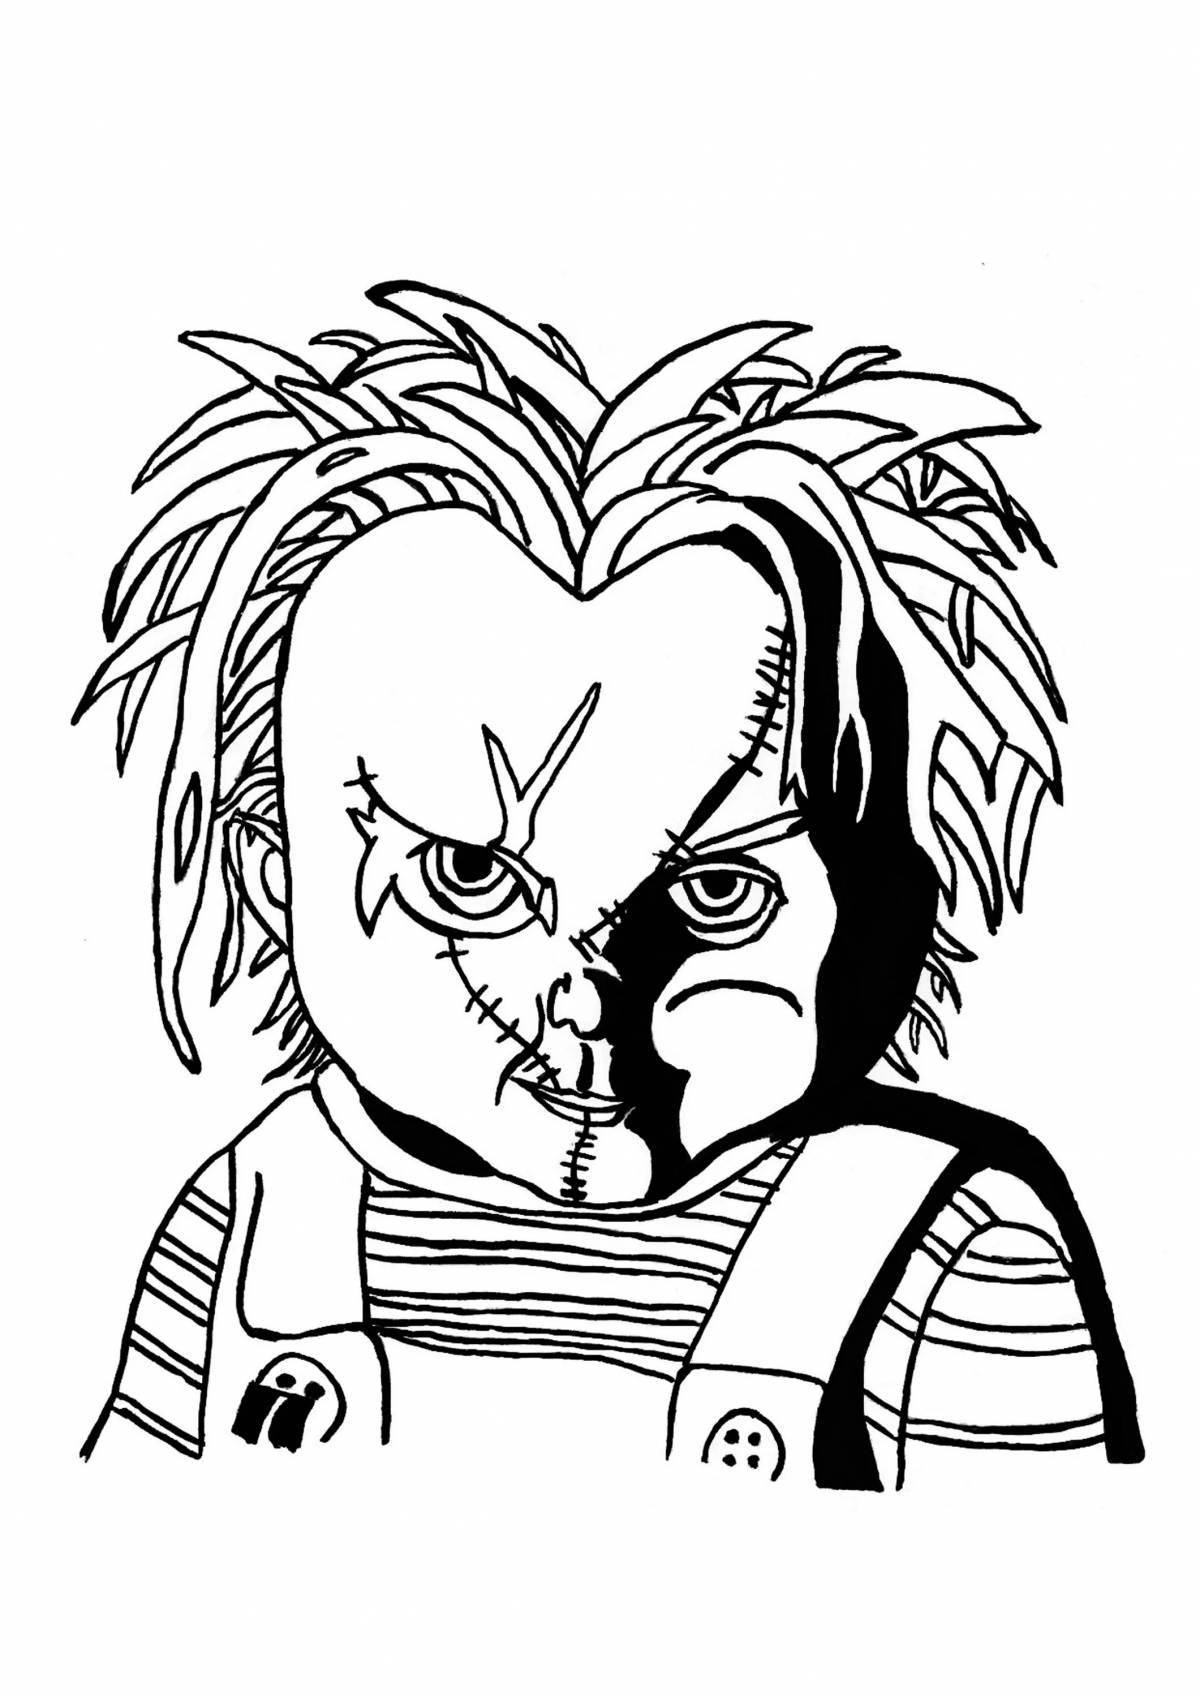 Chucky doll coloring page